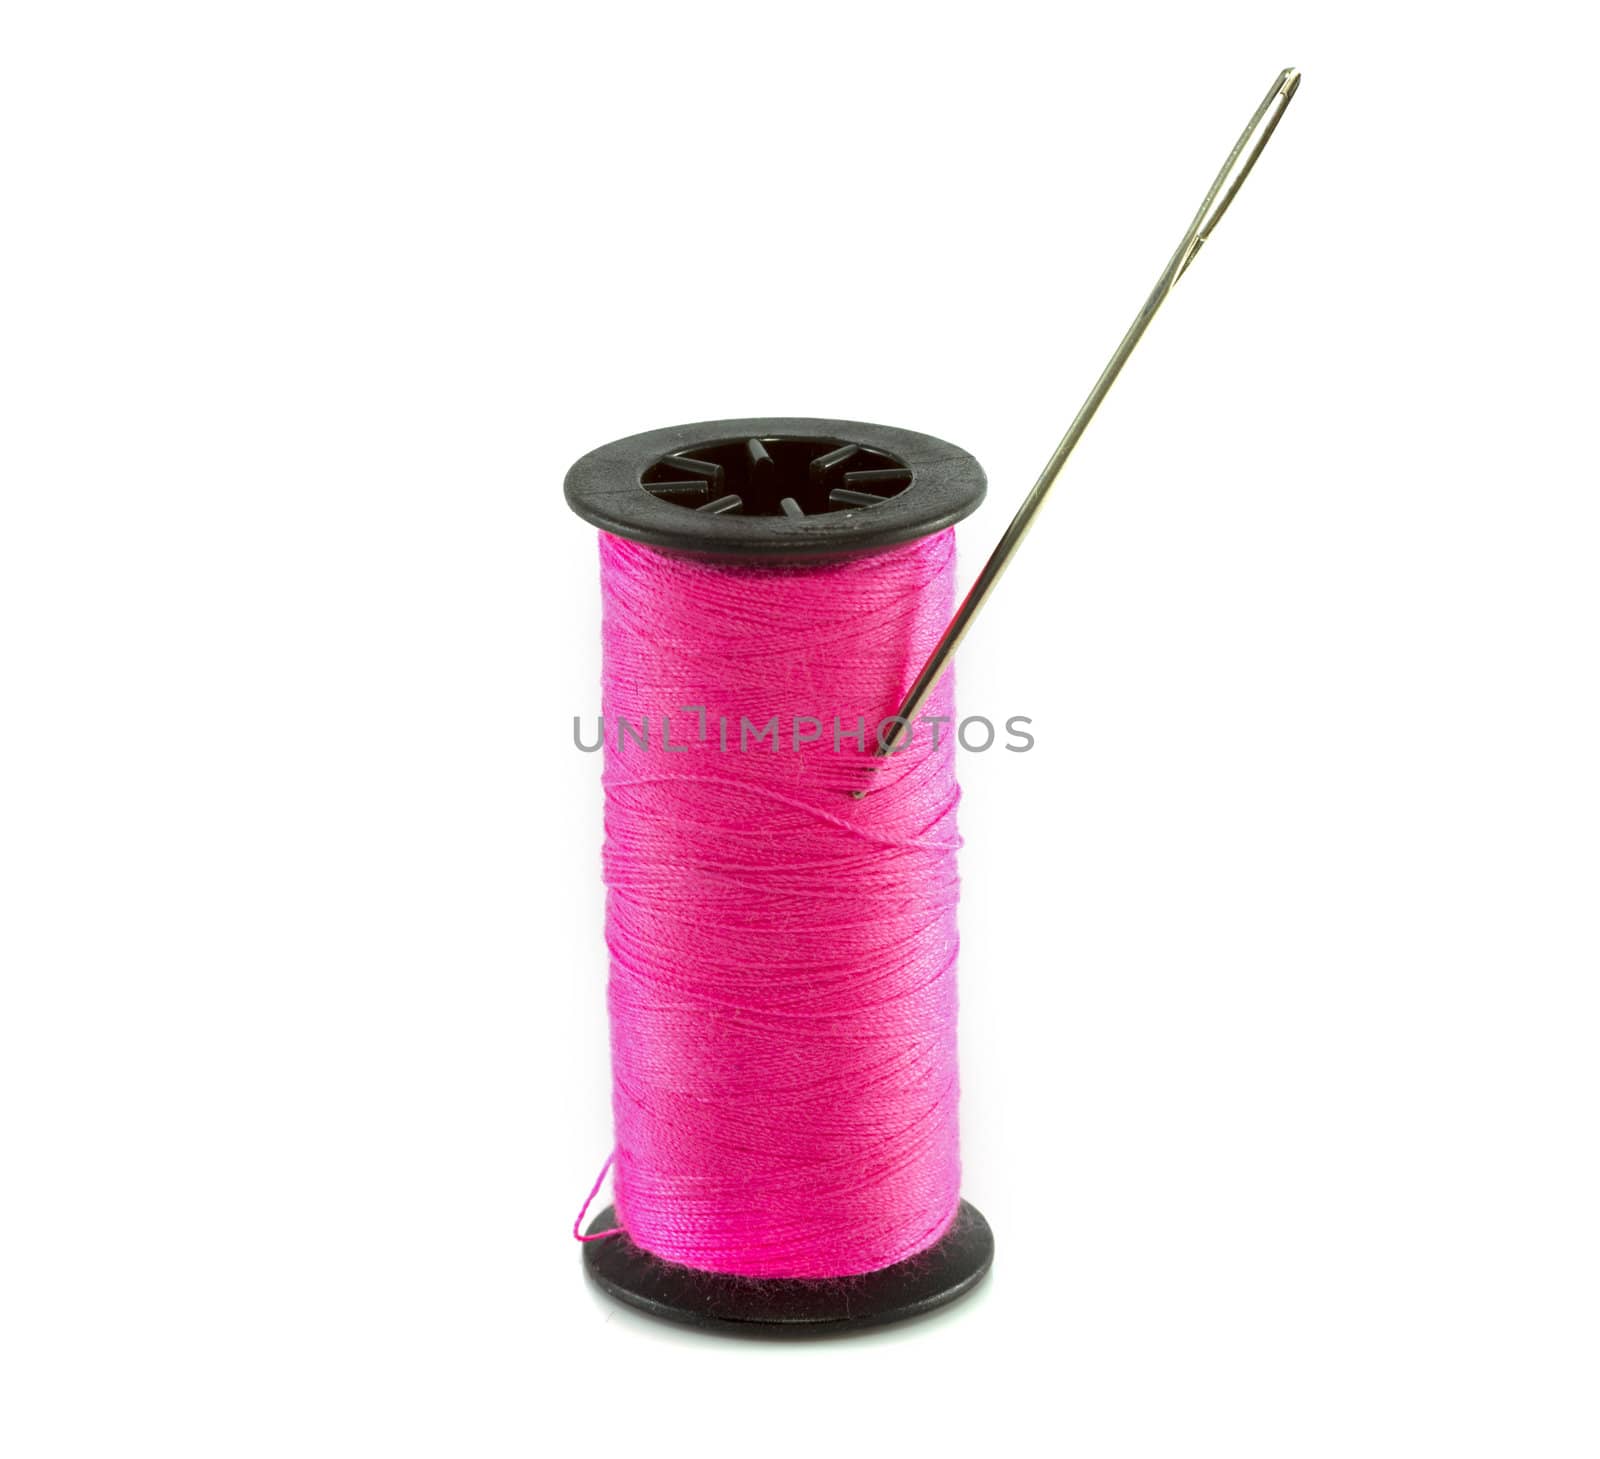 pink thread with needle by compuinfoto